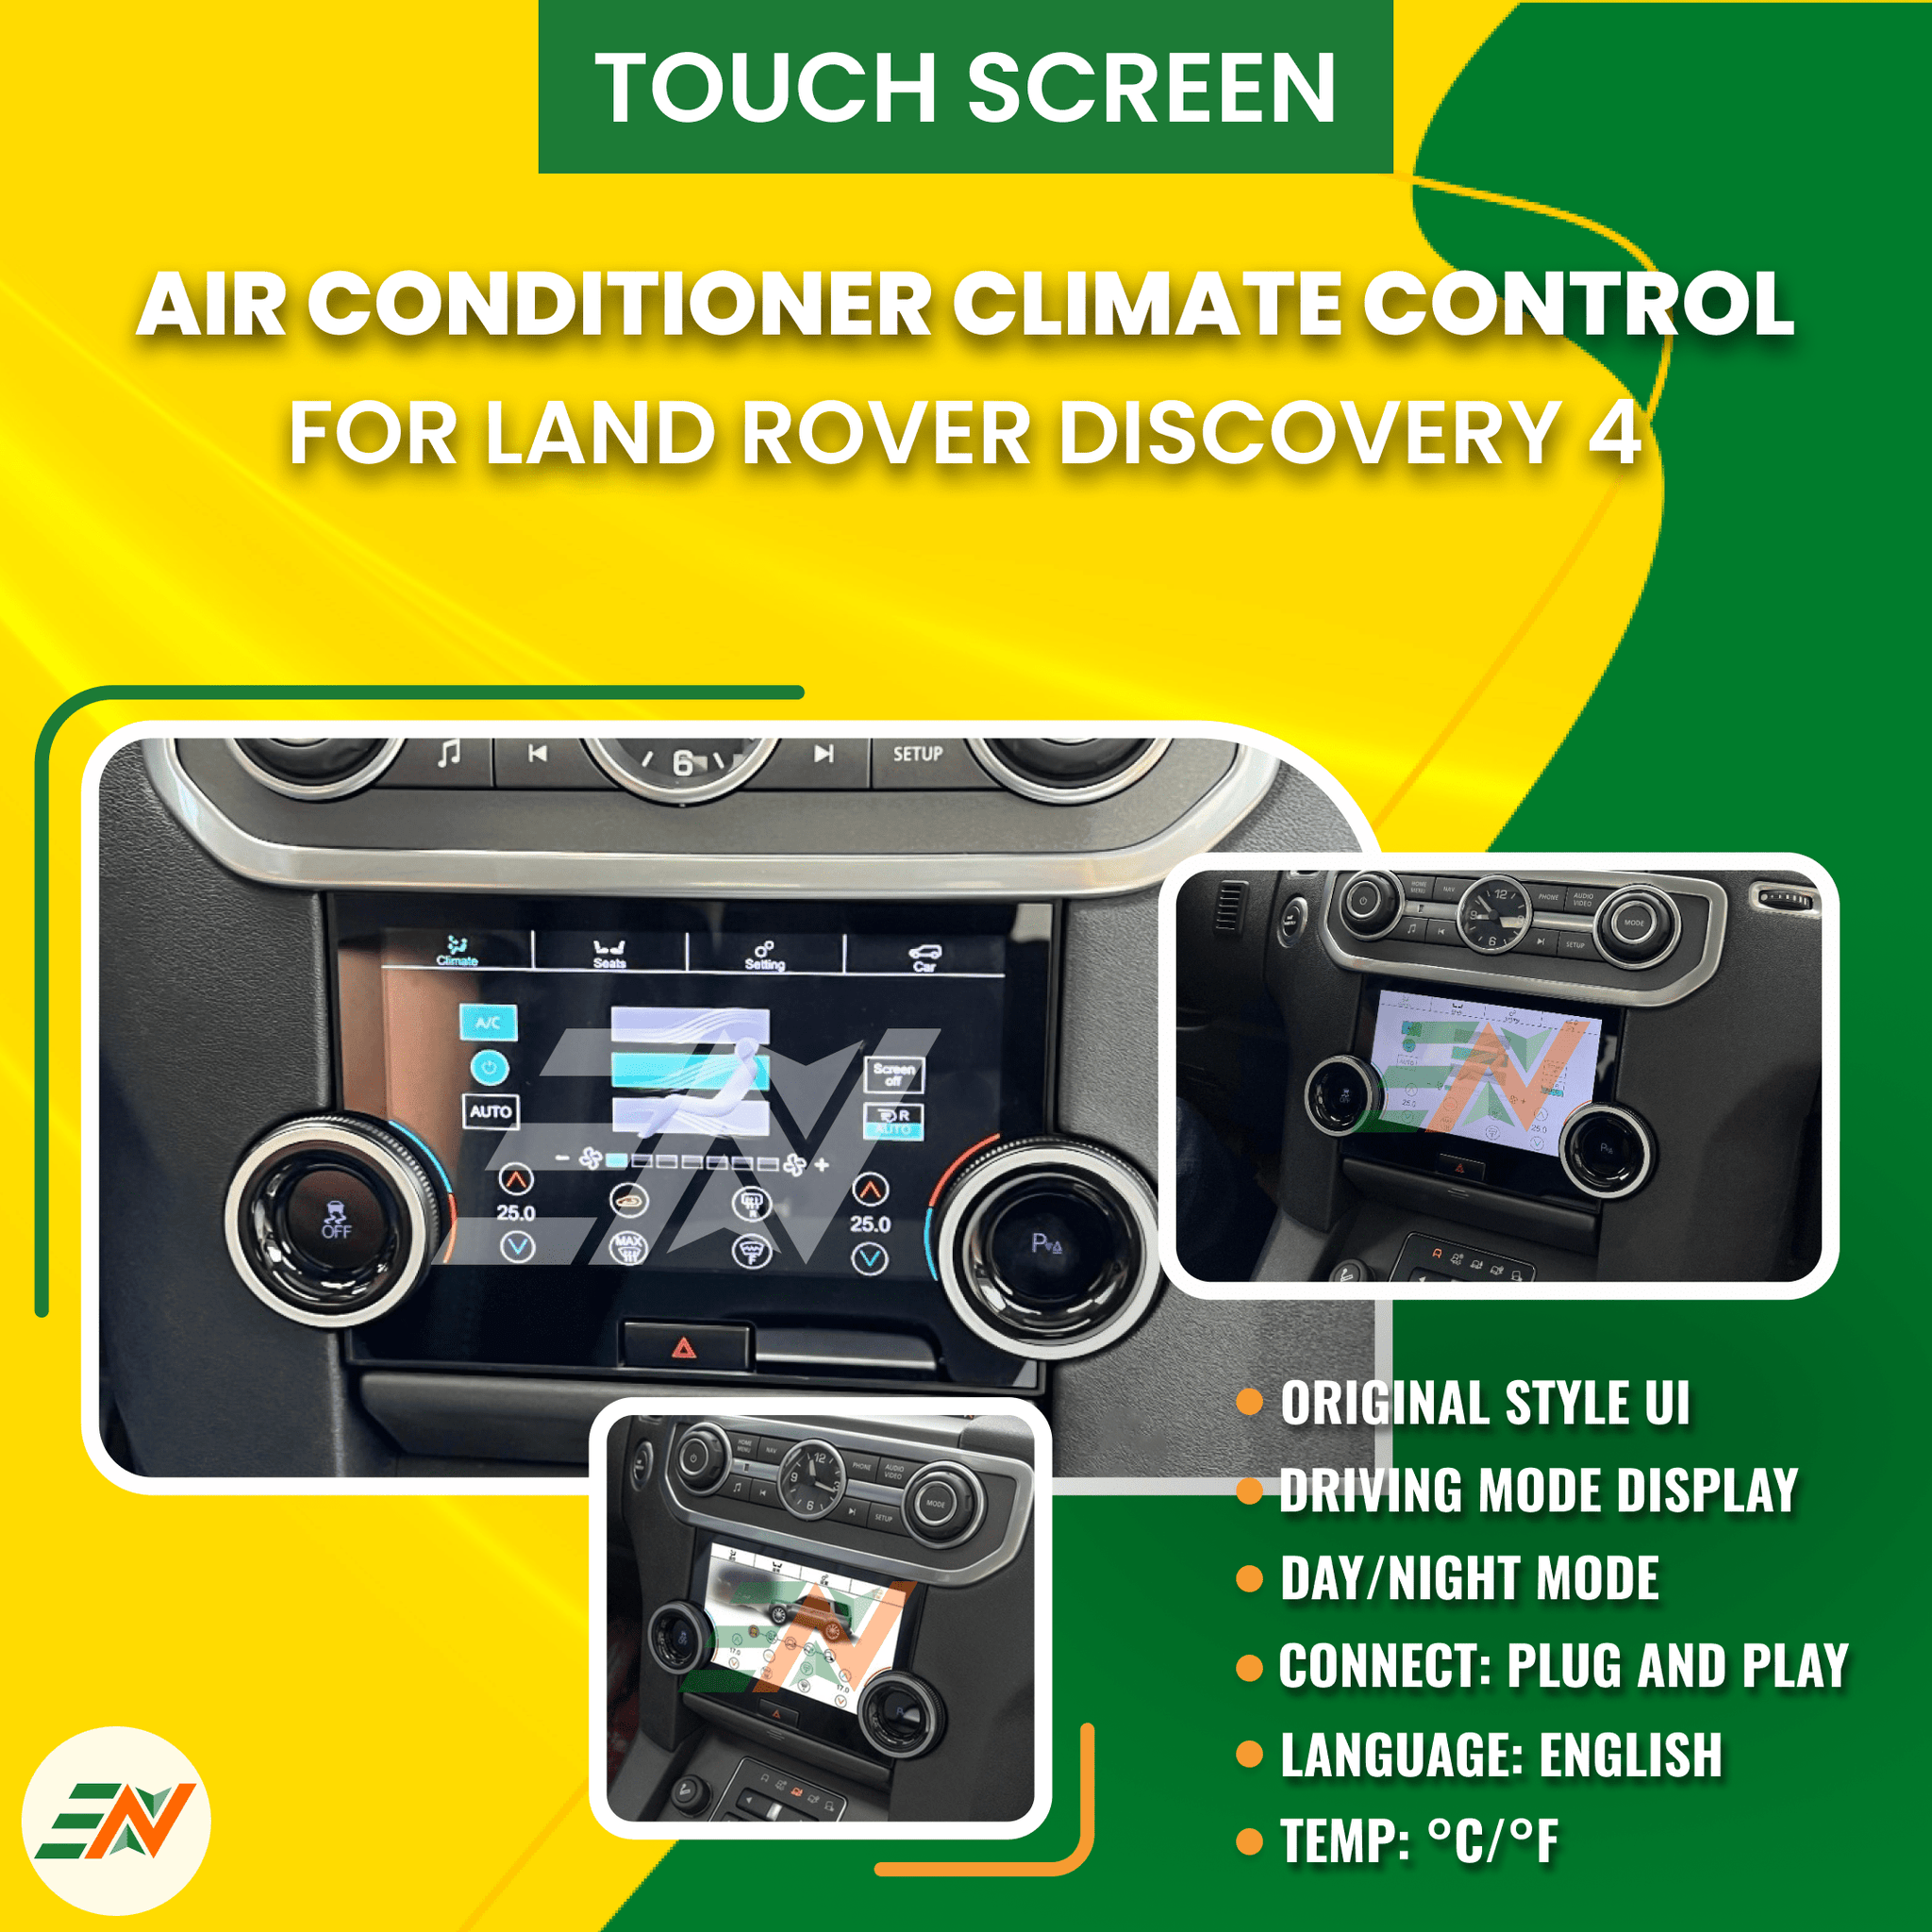 Euronavigate Air conditioner touch screen climate control for Land Rover Discovery 4